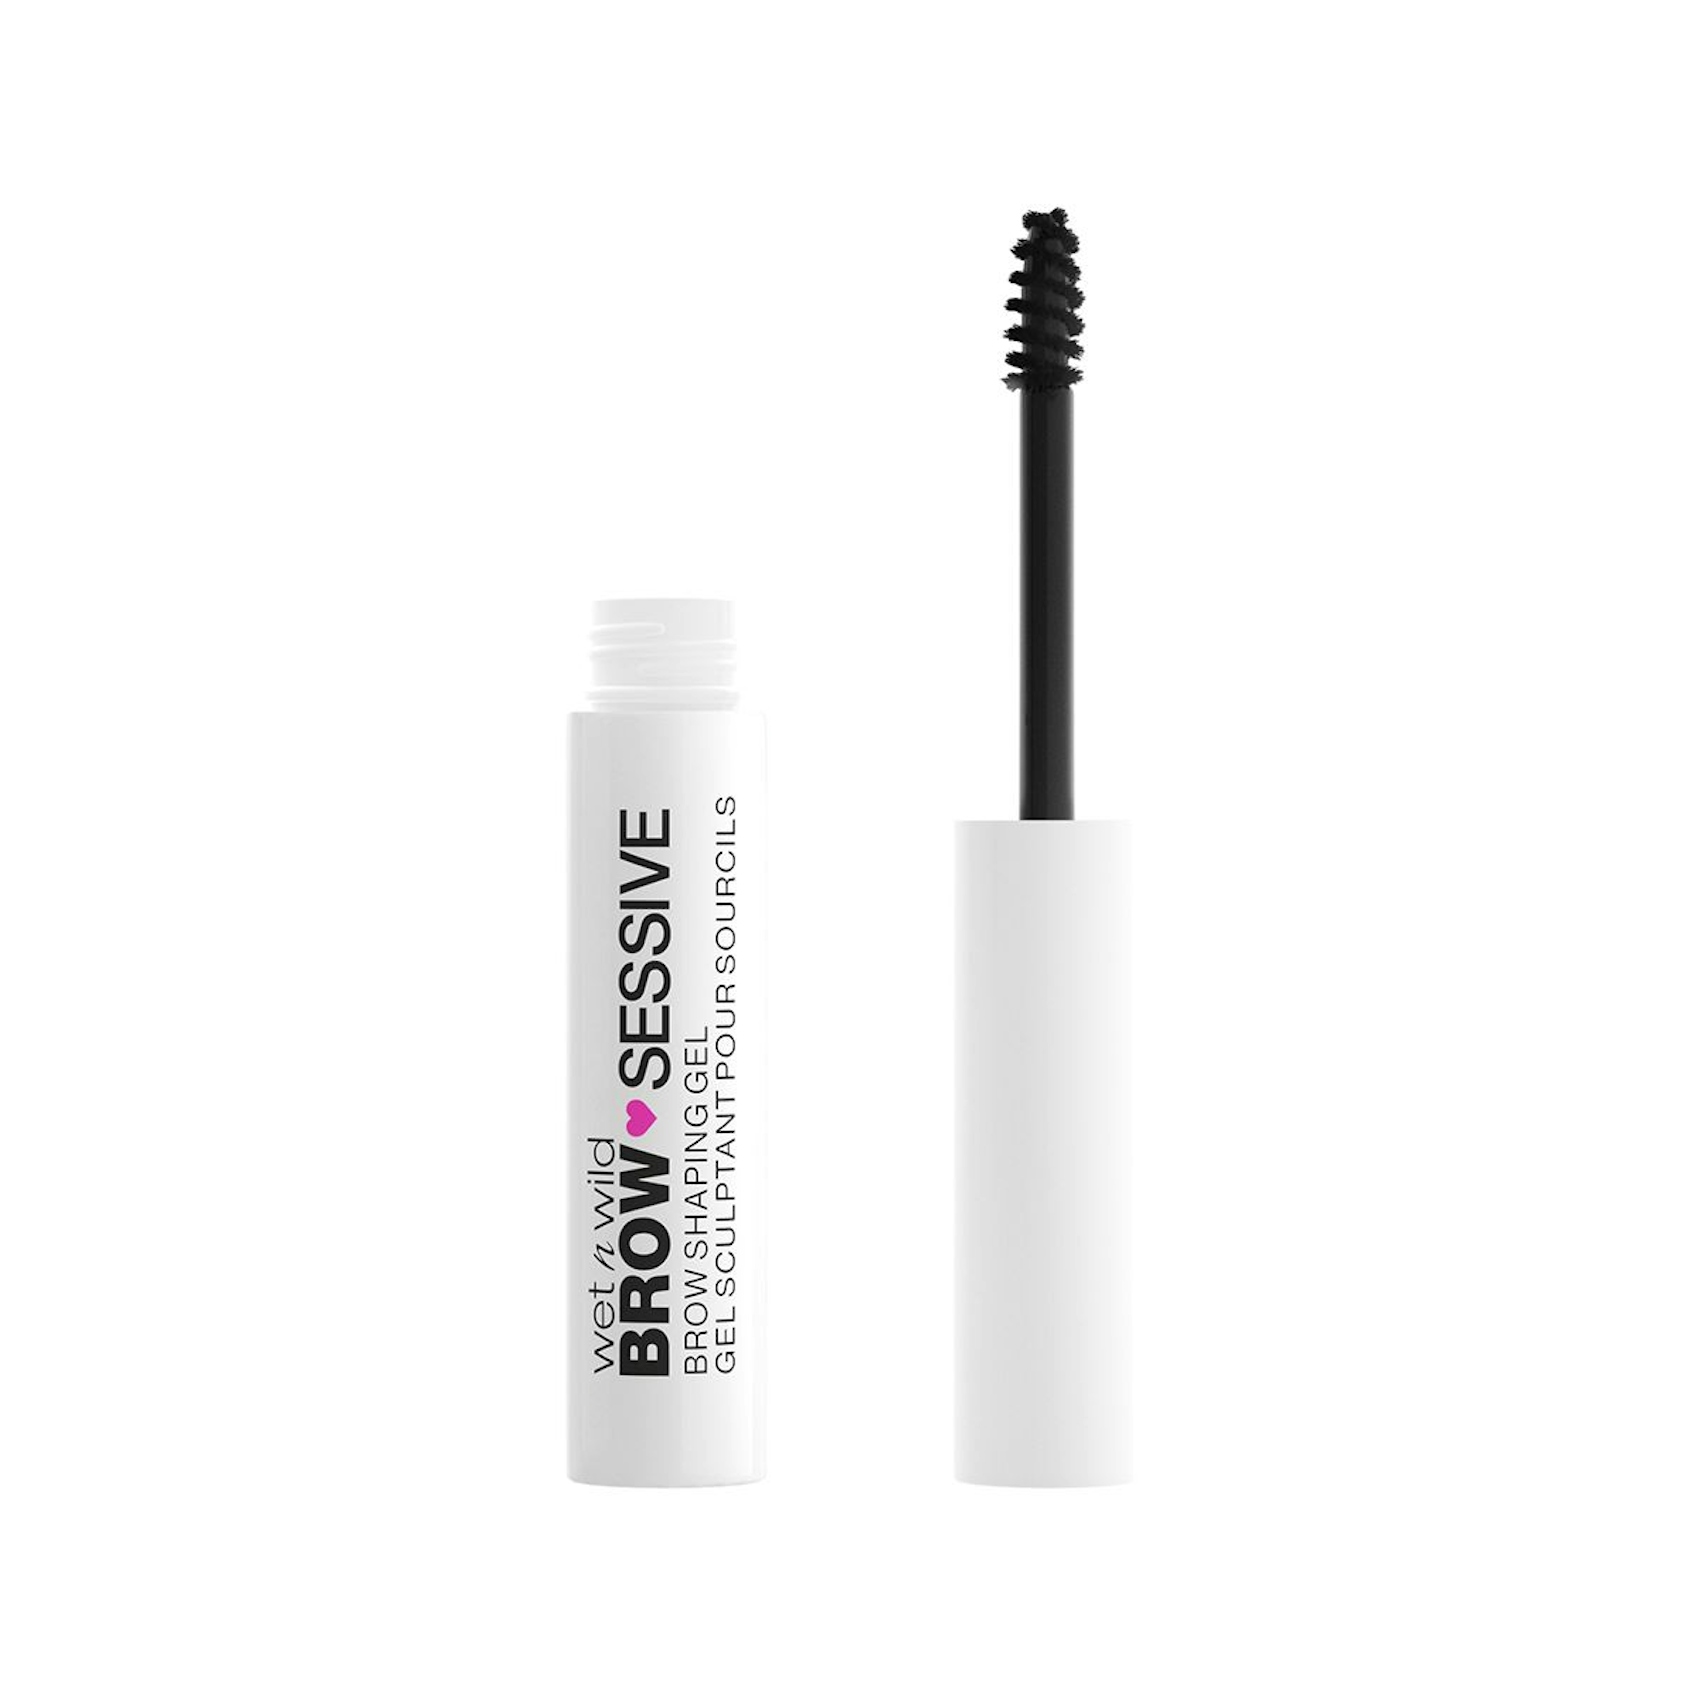 NEW! BROW-SESSIVE BROW SHAPING GEL Brown